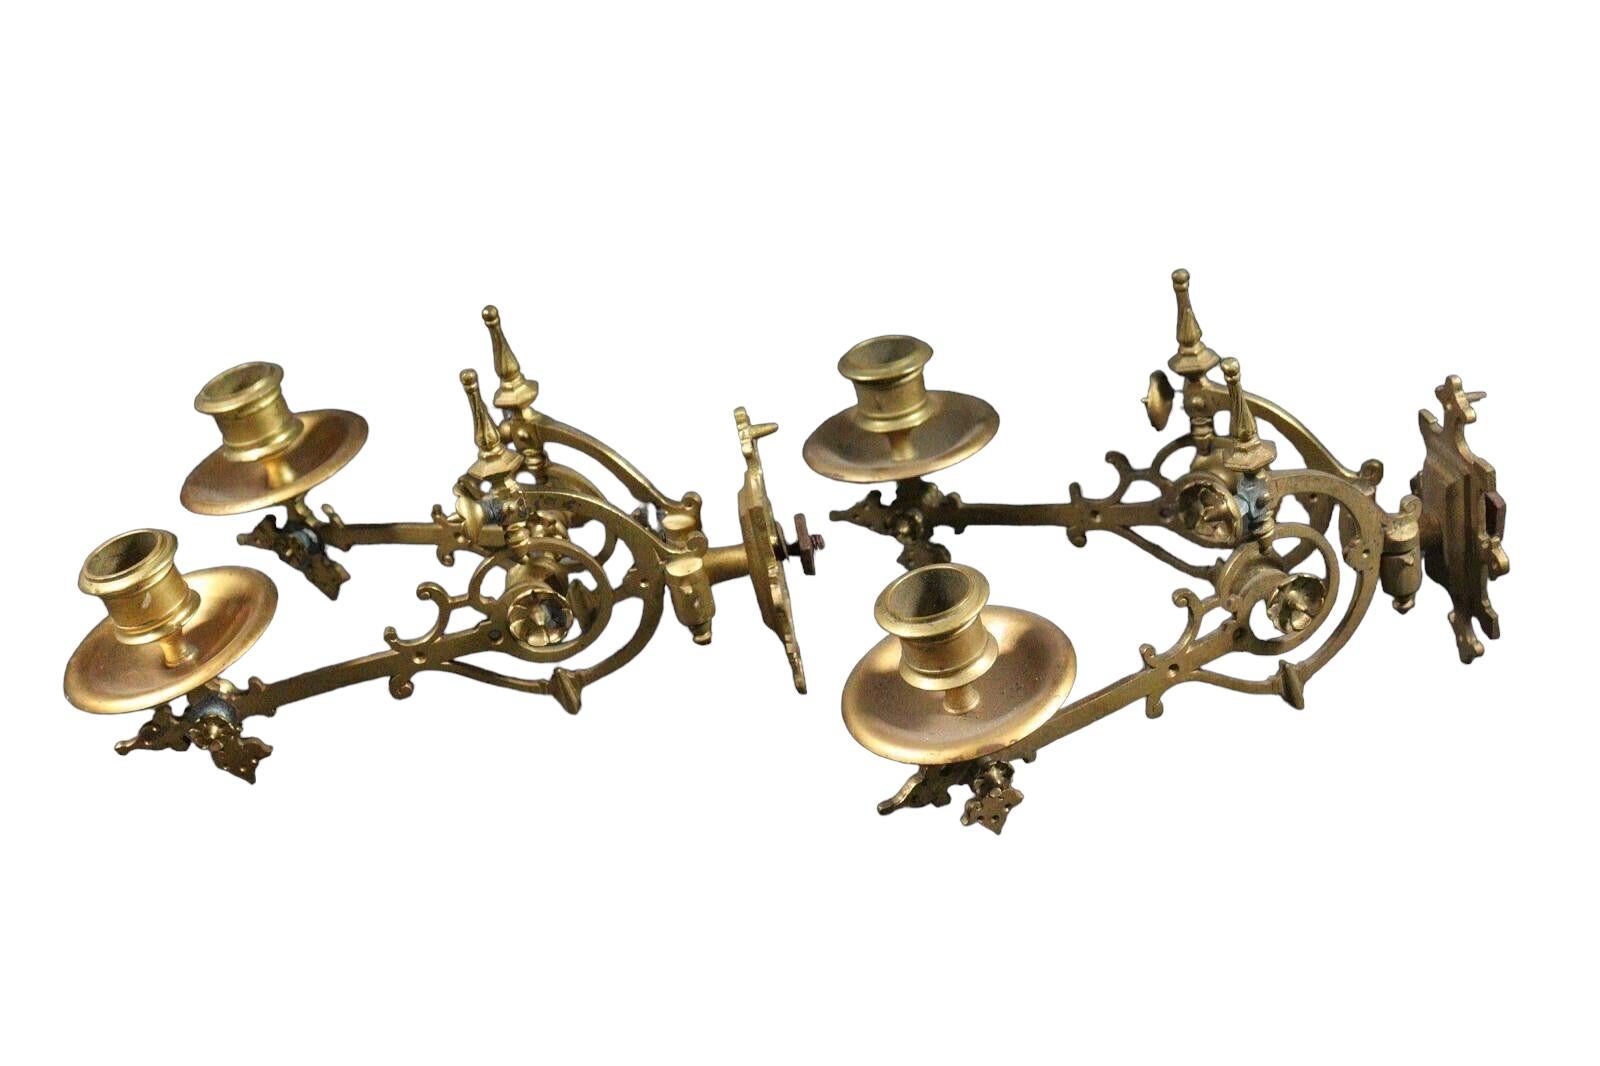 19th Century Two Original Bronze Art Nouveau Candle Sconce for a Piano or Wall Germany, 1890s For Sale